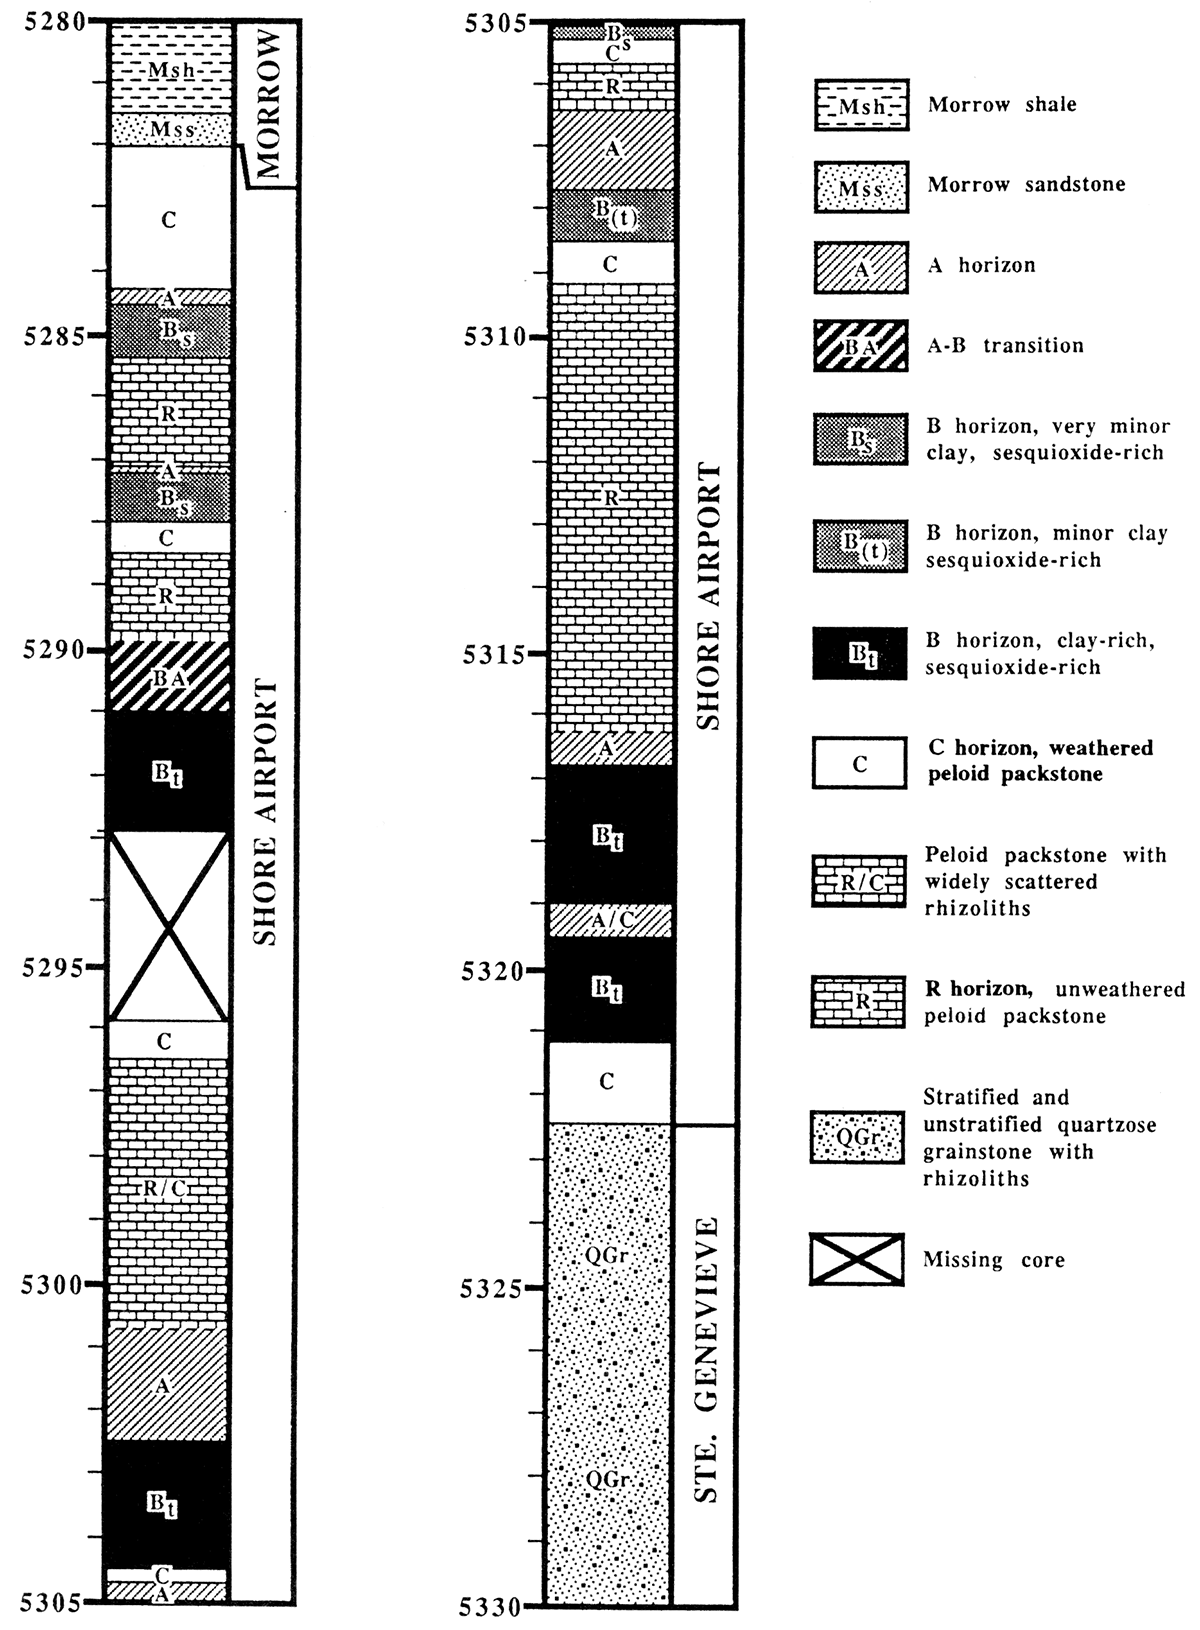 Soil horizons in the type section of the Shore Airport Formation.